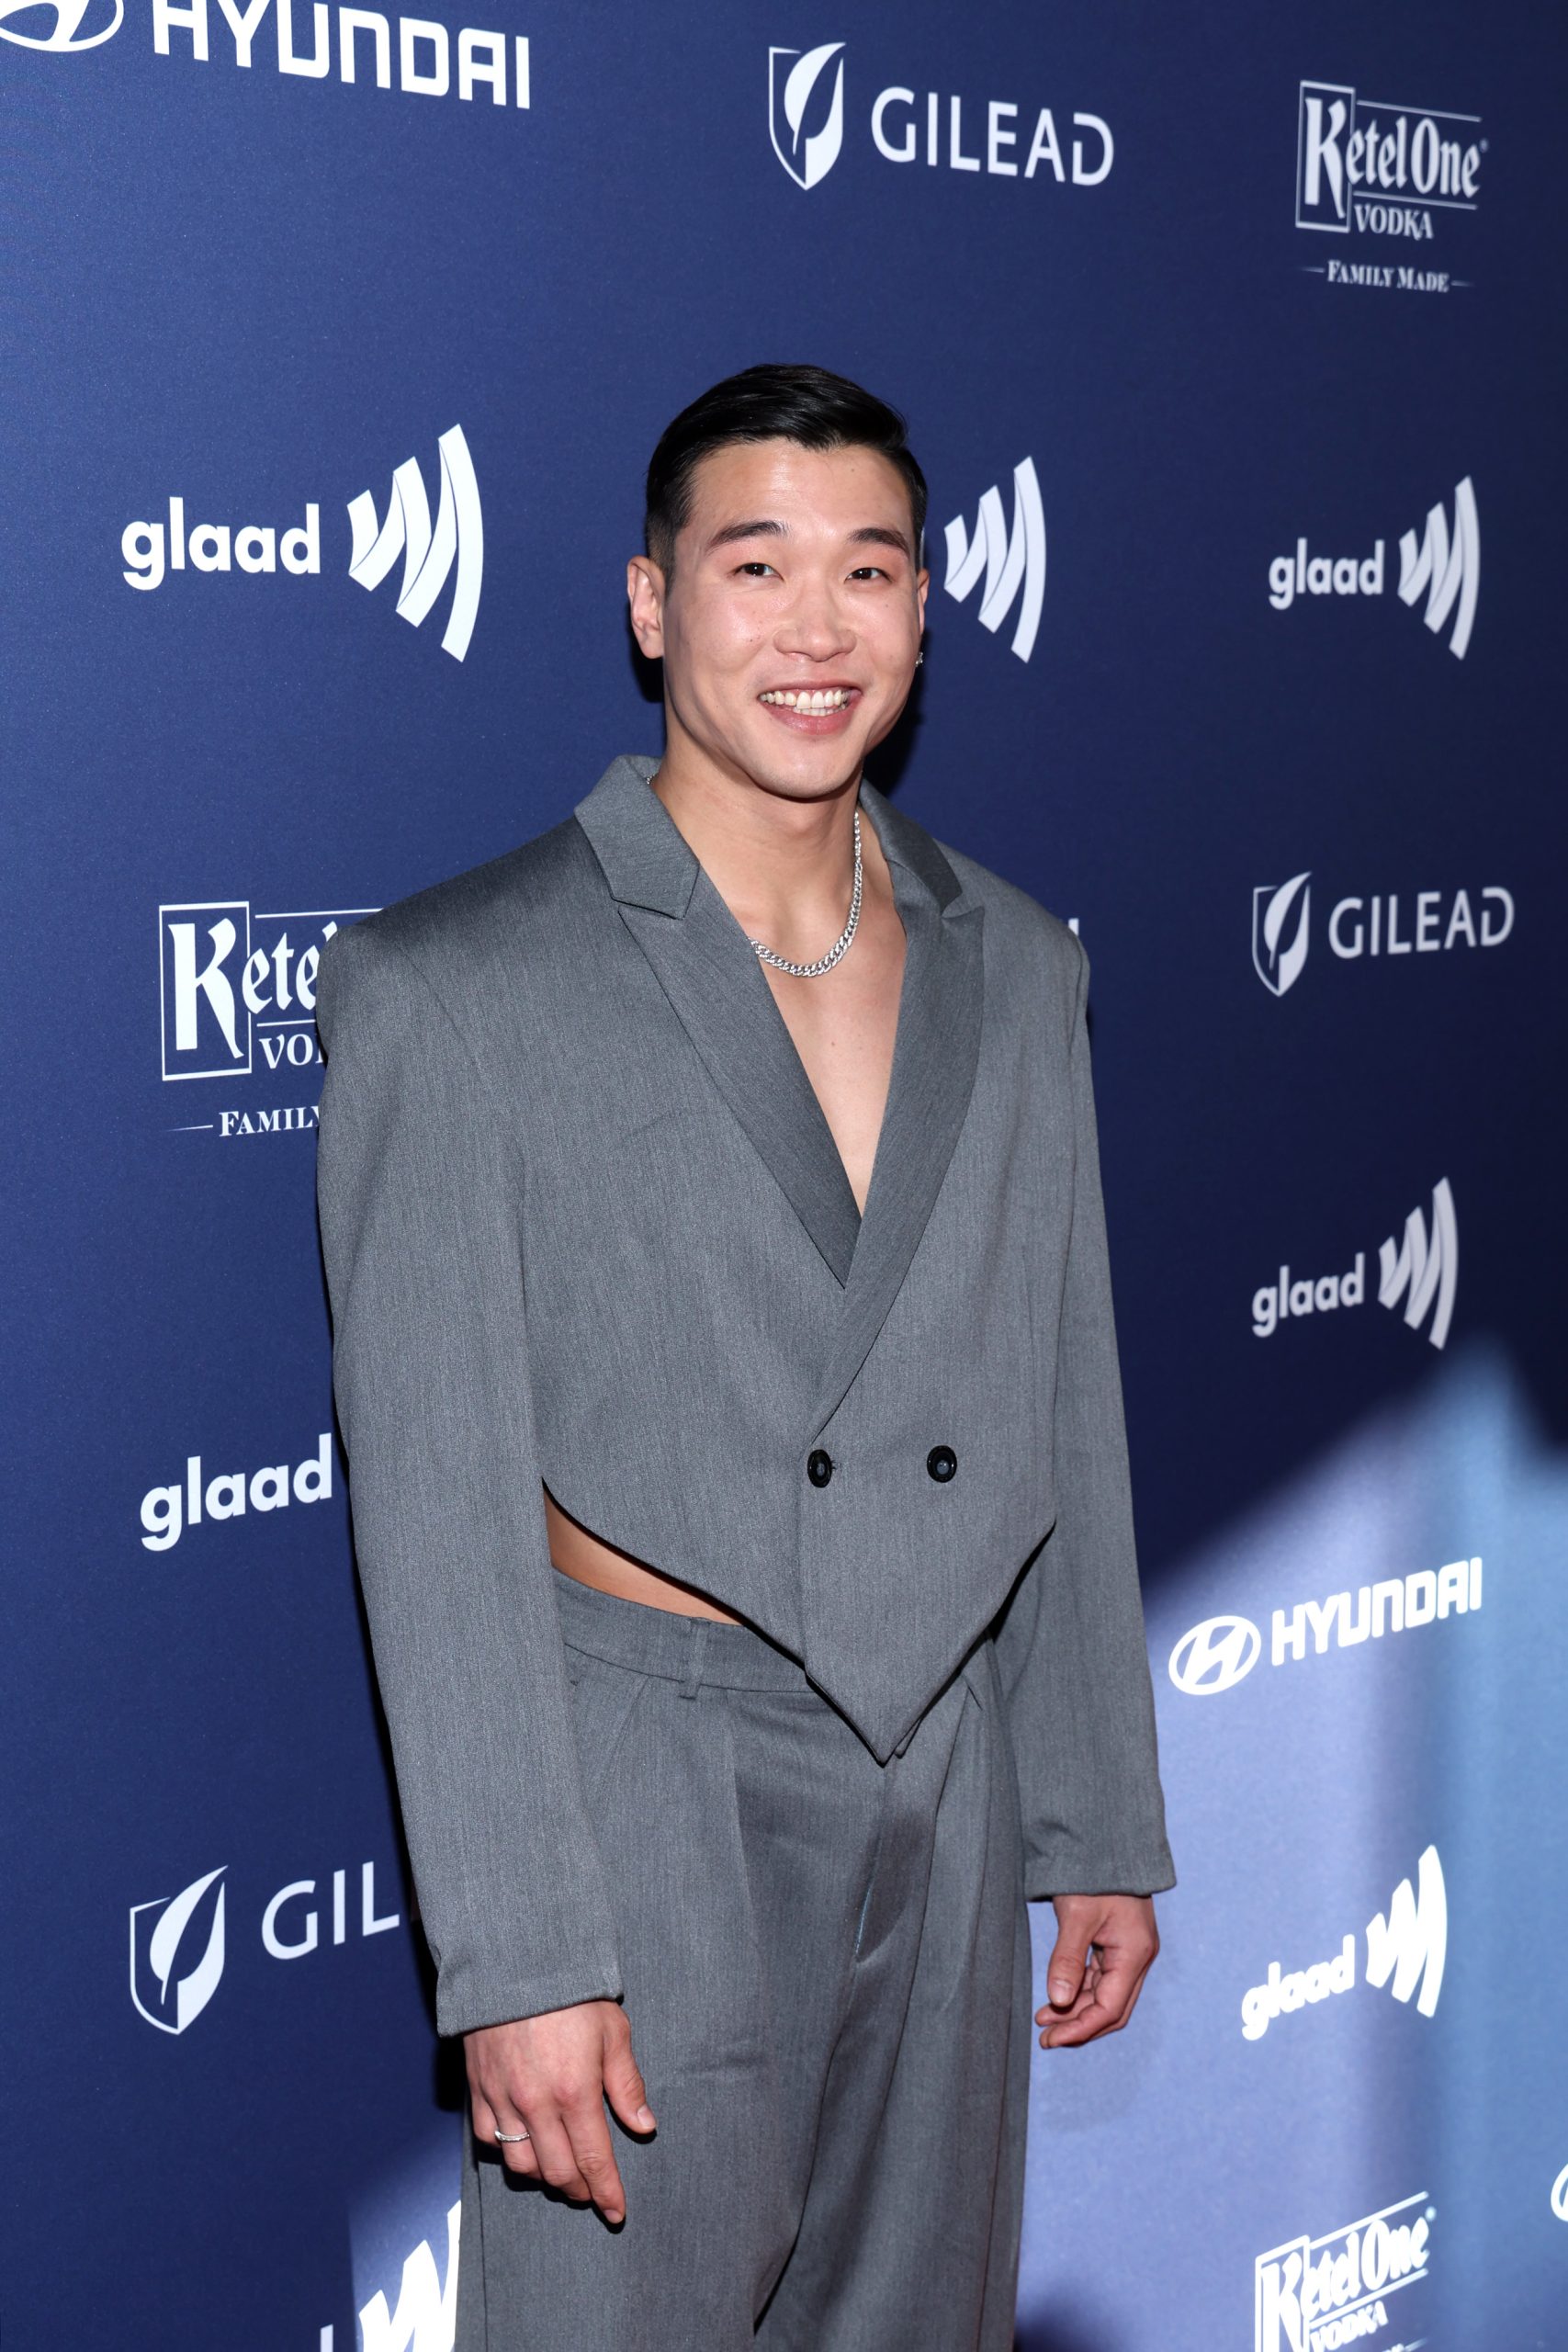 BEVERLY HILLS, CALIFORNIA - MARCH 30: Joel Kim Booster attends the 34th Annual GLAAD Media Awards Sponsored by Ketel One Family Made Vodka at The Beverly Hilton on March 30, 2023 in Beverly Hills, California. (Photo by Phillip Faraone/Getty Images for Ketel One)